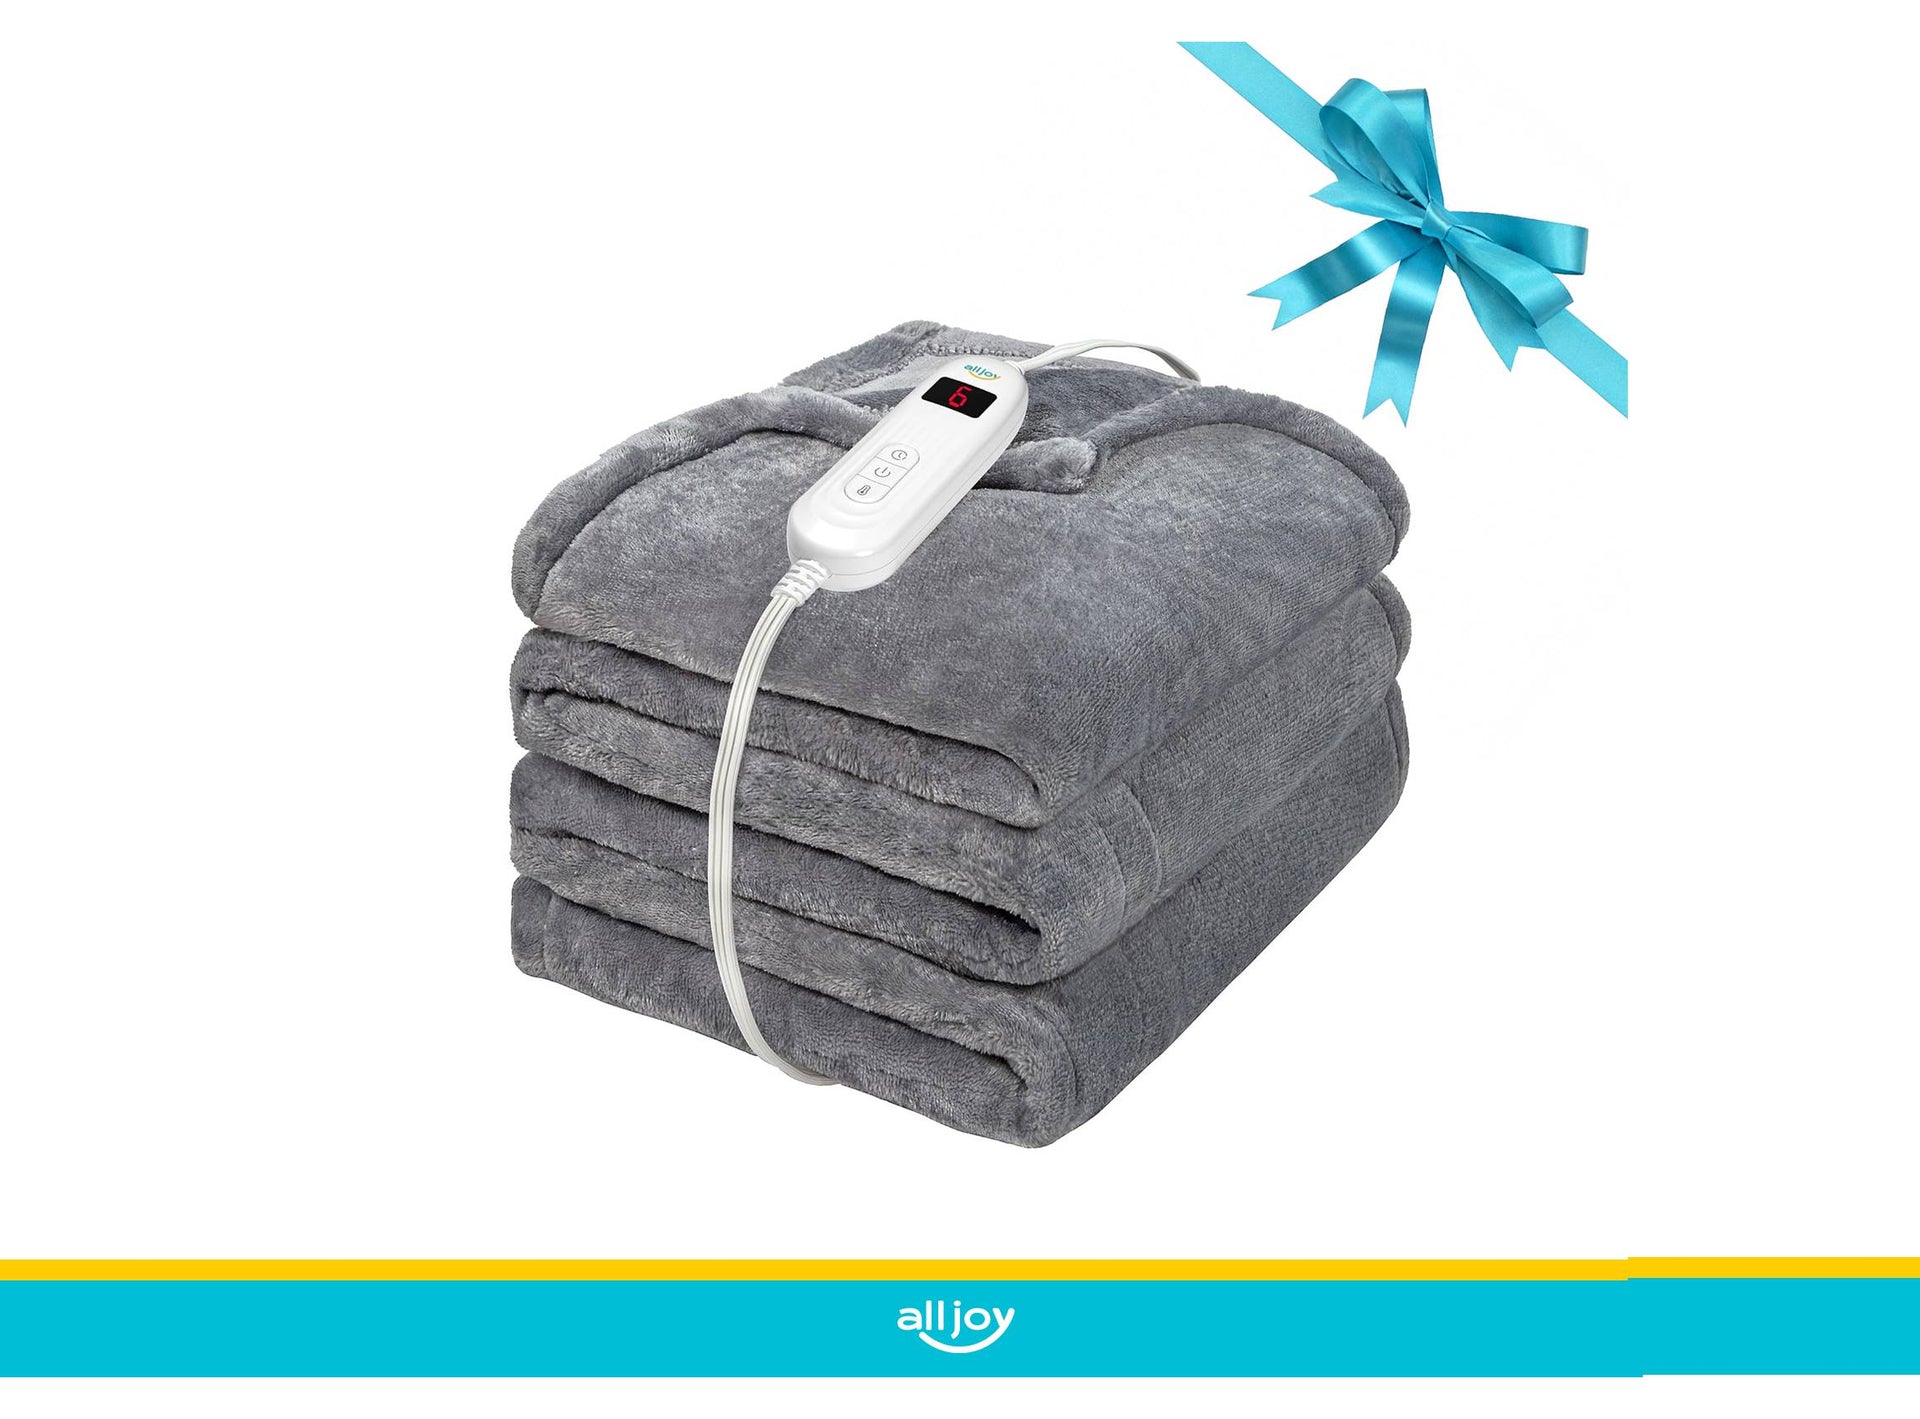 3 Reasons To Buy a Heating Pad - ALL JOY Official